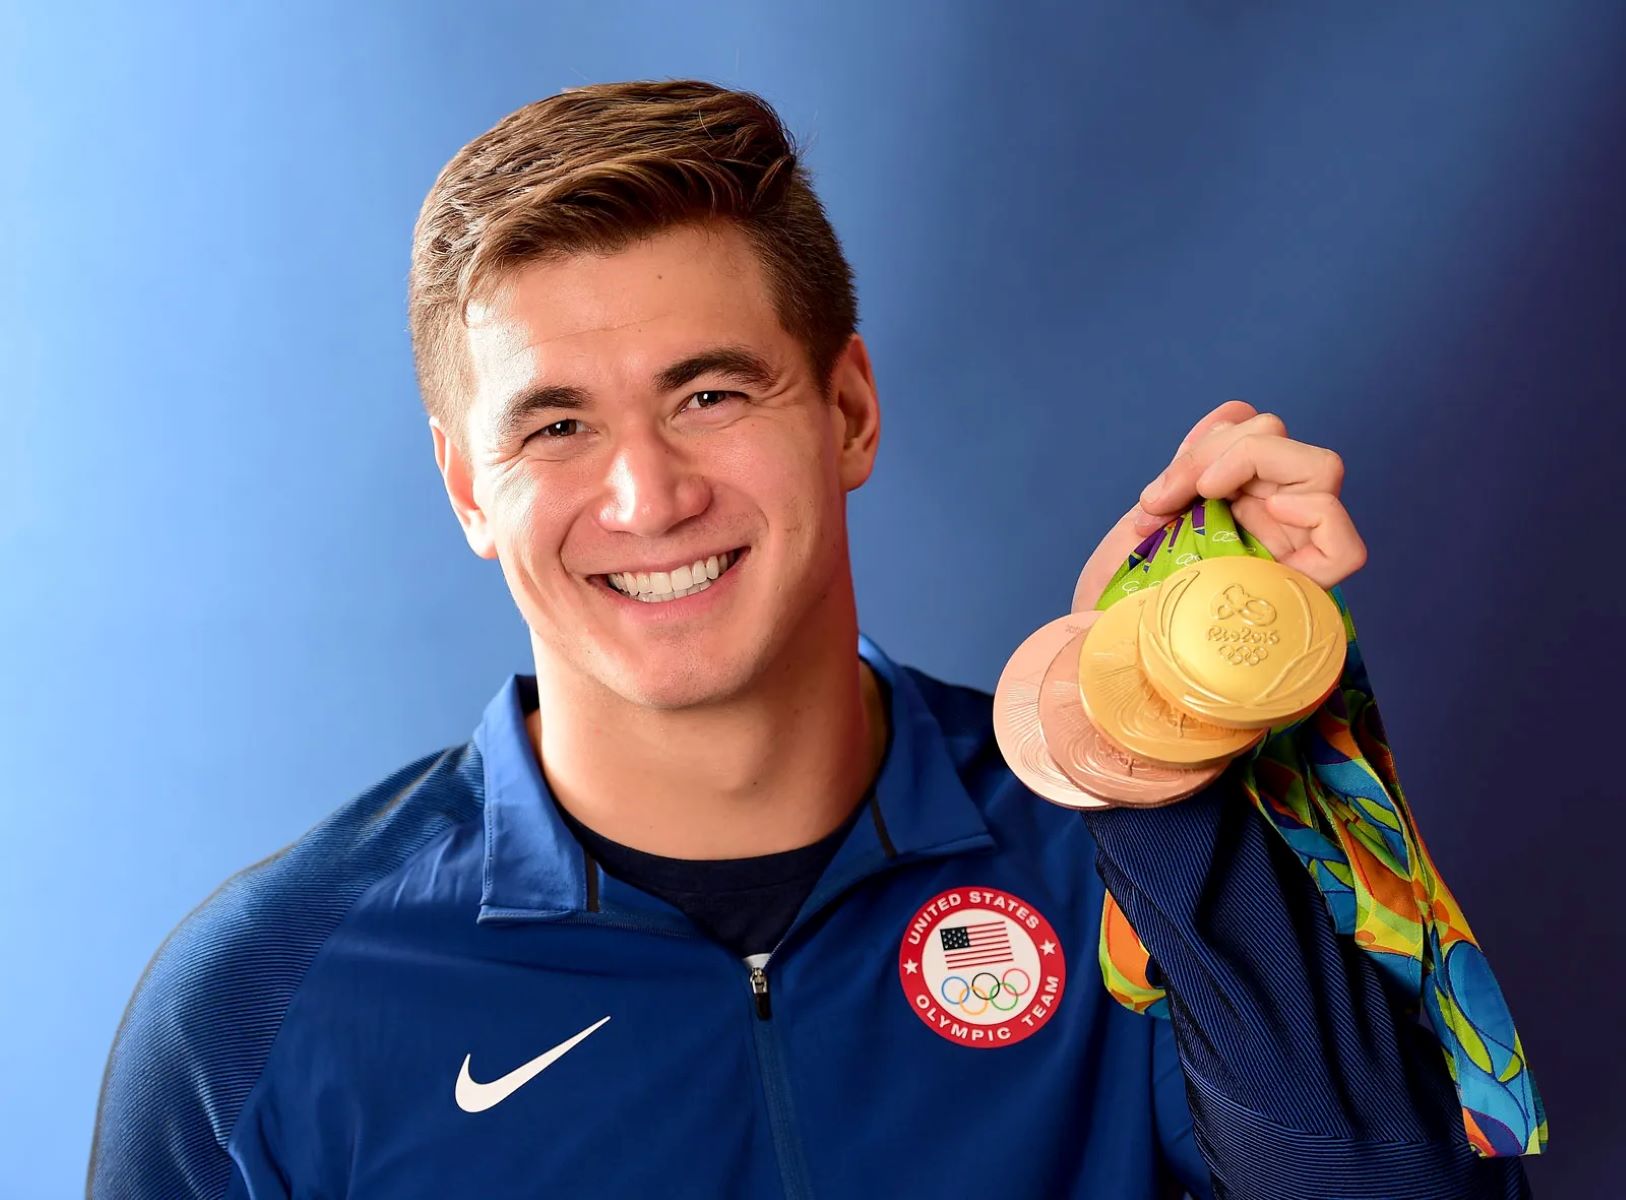 25-captivating-facts-about-nathan-adrian